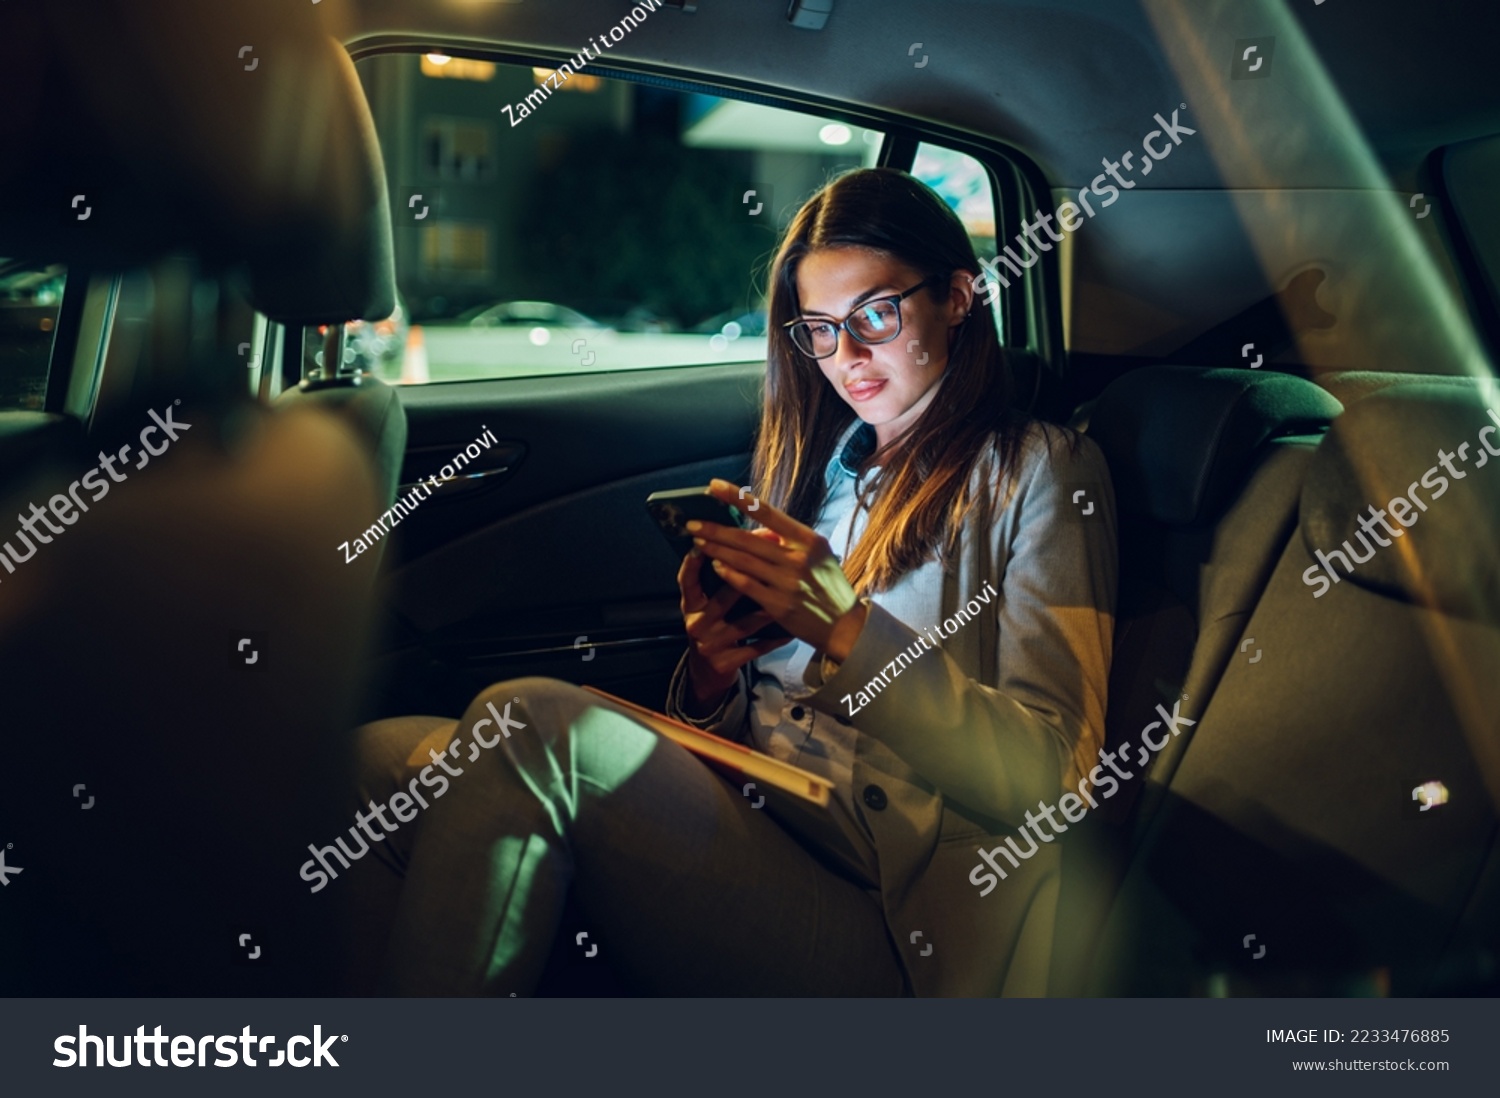 Beautiful young businesswoman traveling with car on a business trip during night while sitting in a back seat and using a smartphone. Gorgeous female using mobile phone to send email or messages. #2233476885